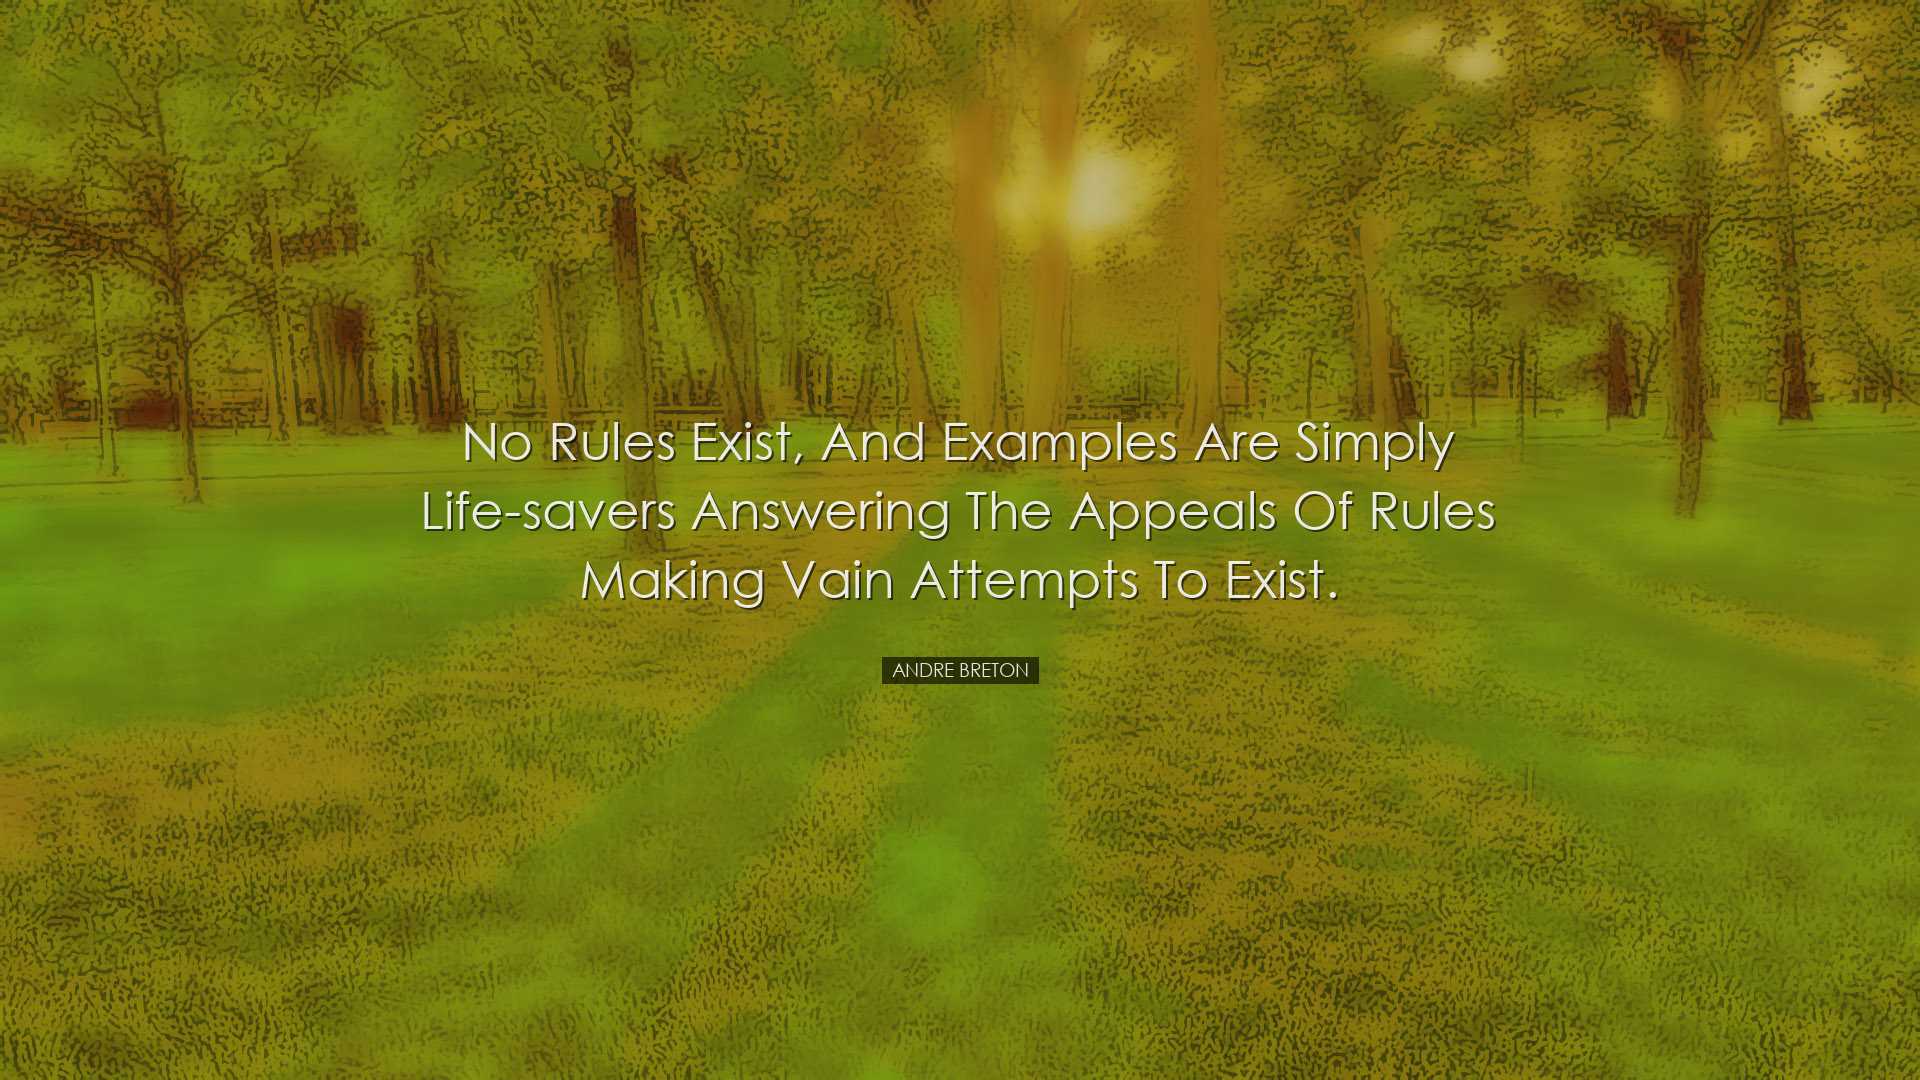 No rules exist, and examples are simply life-savers answering the